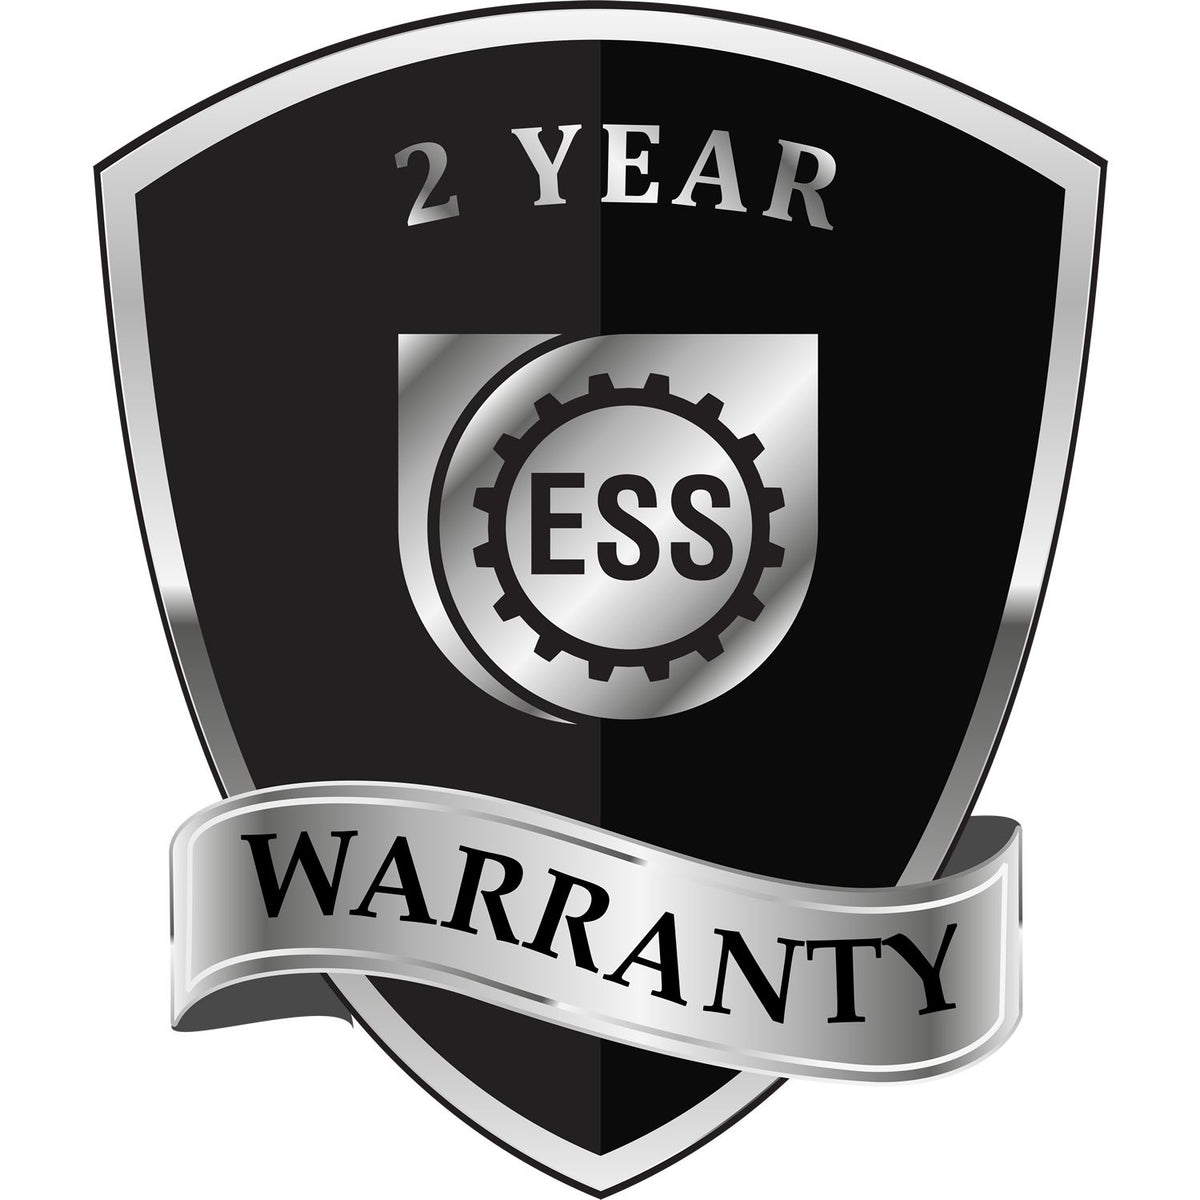 A black and silver badge or emblem showing warranty information for the State of West Virginia Extended Long Reach Geologist Seal